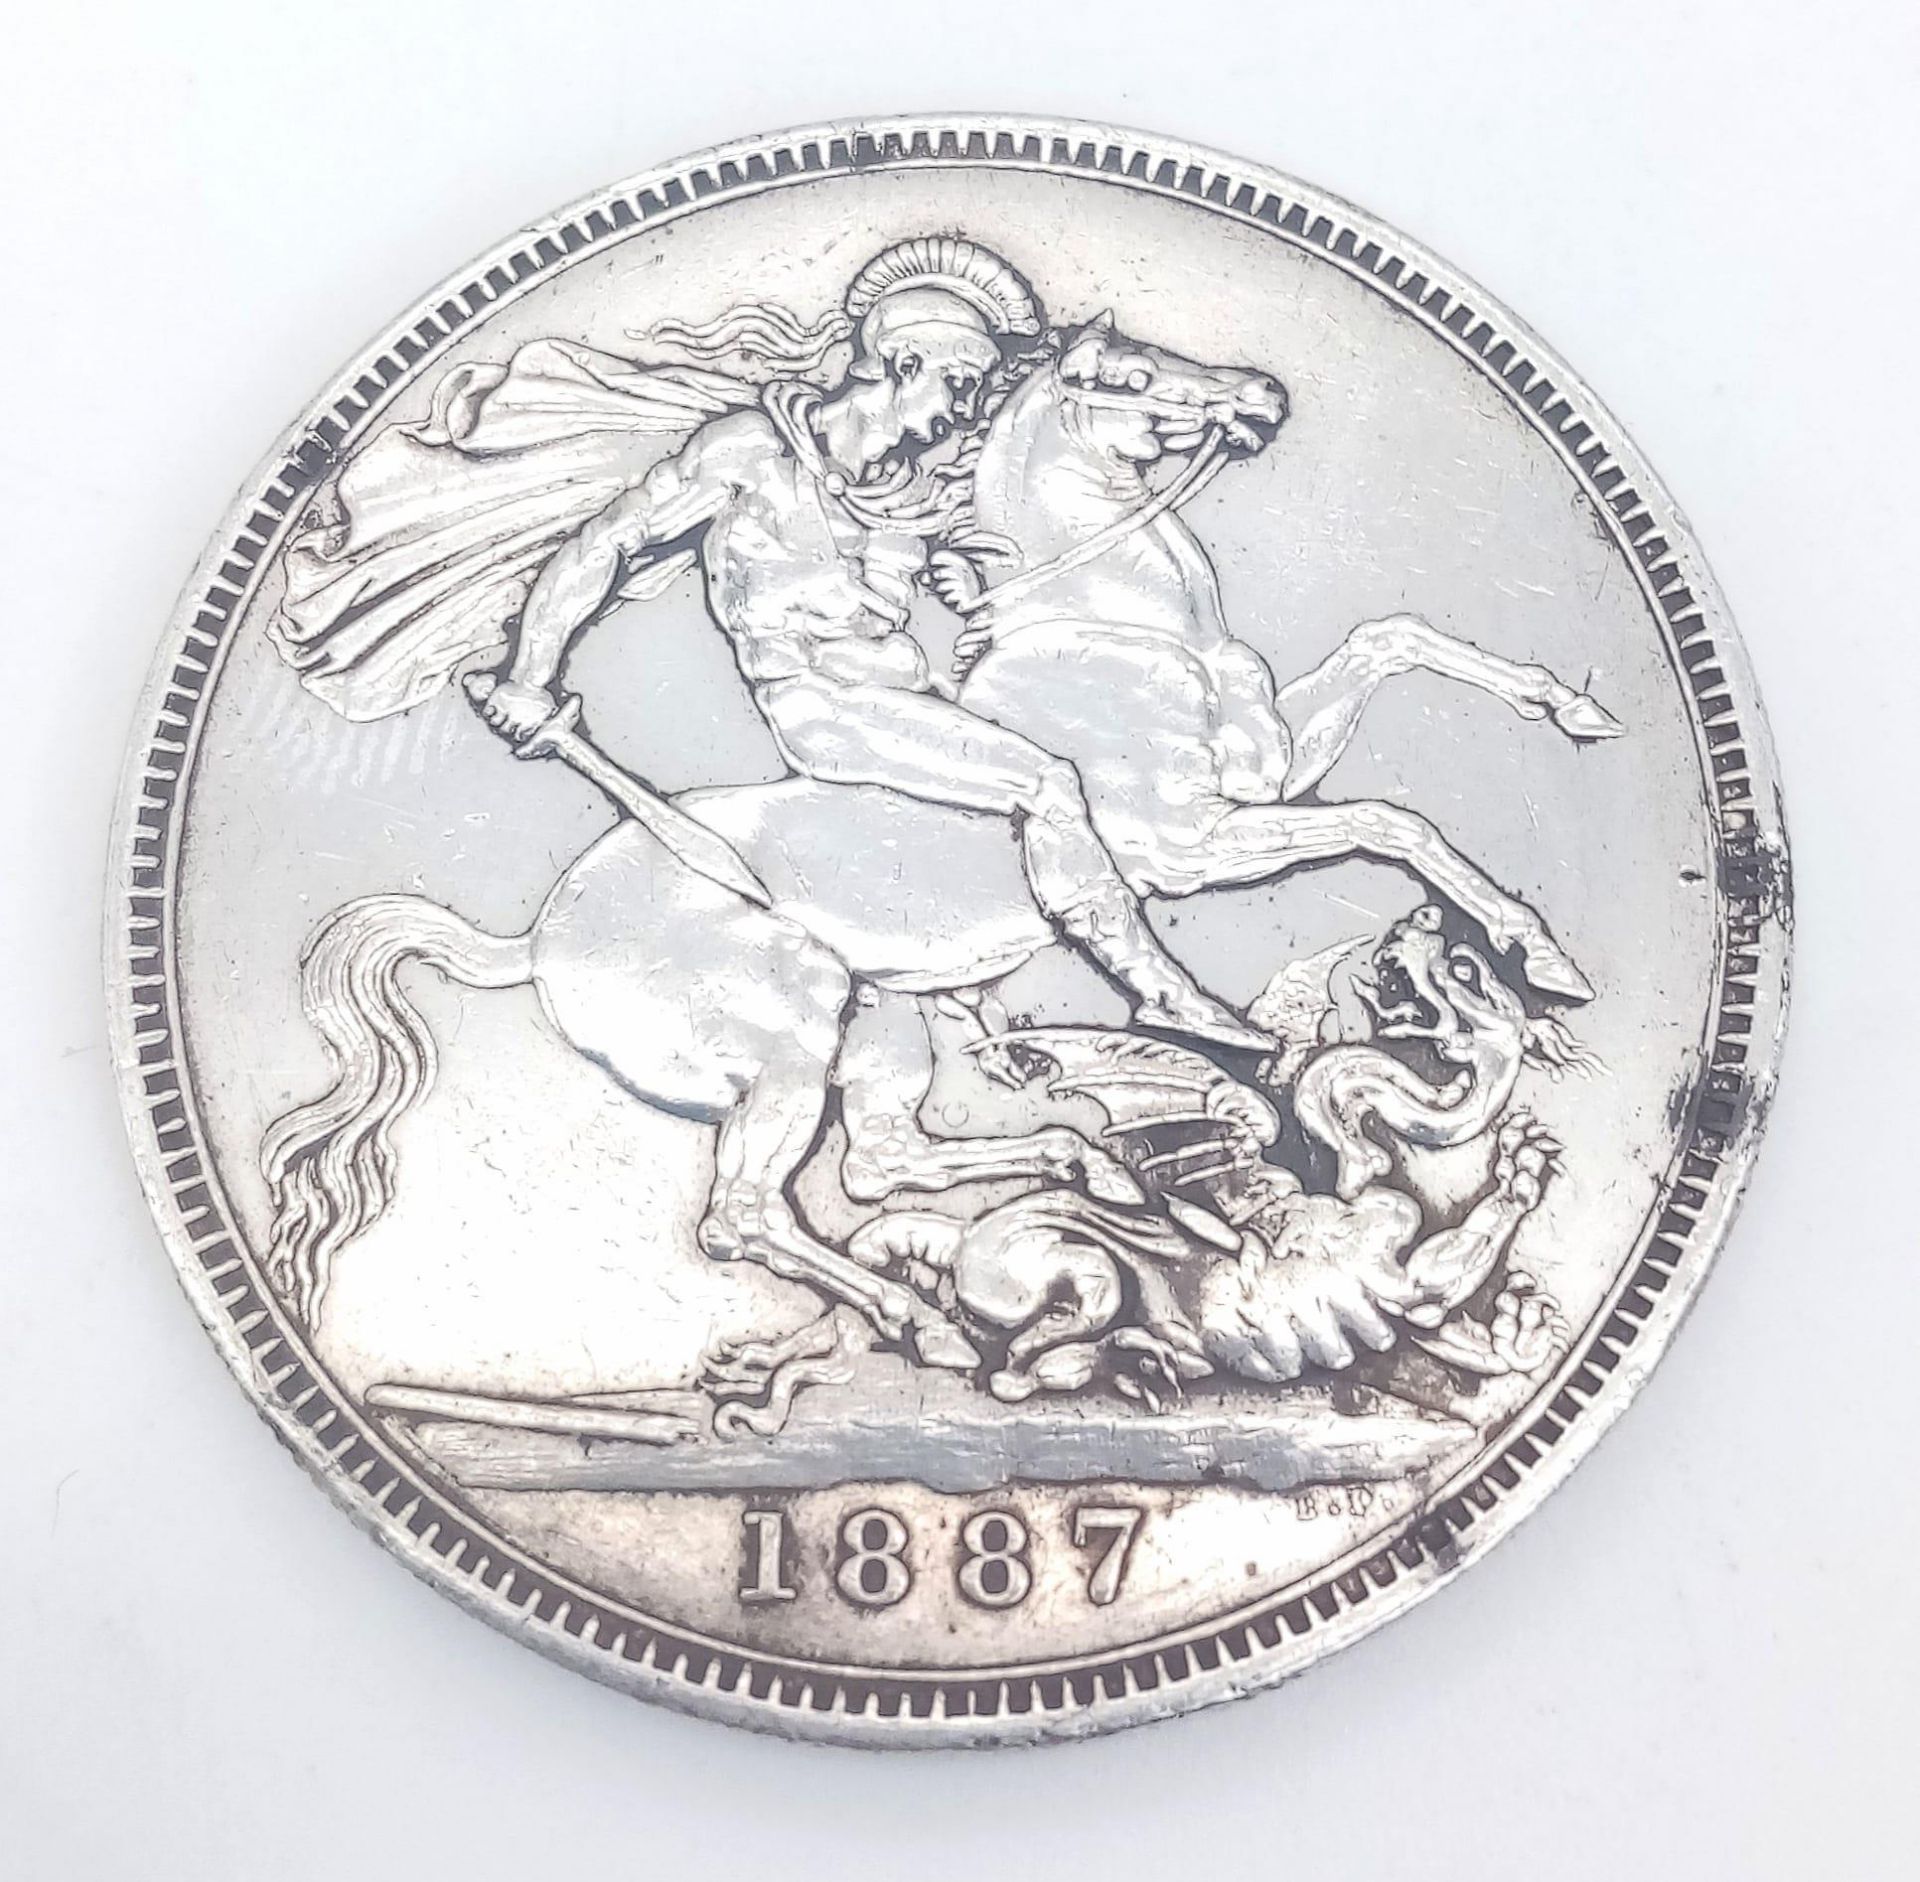 A QUEEN VICTORIA SILVER CROWN DATED 1887 IN GOOD CONDITION .